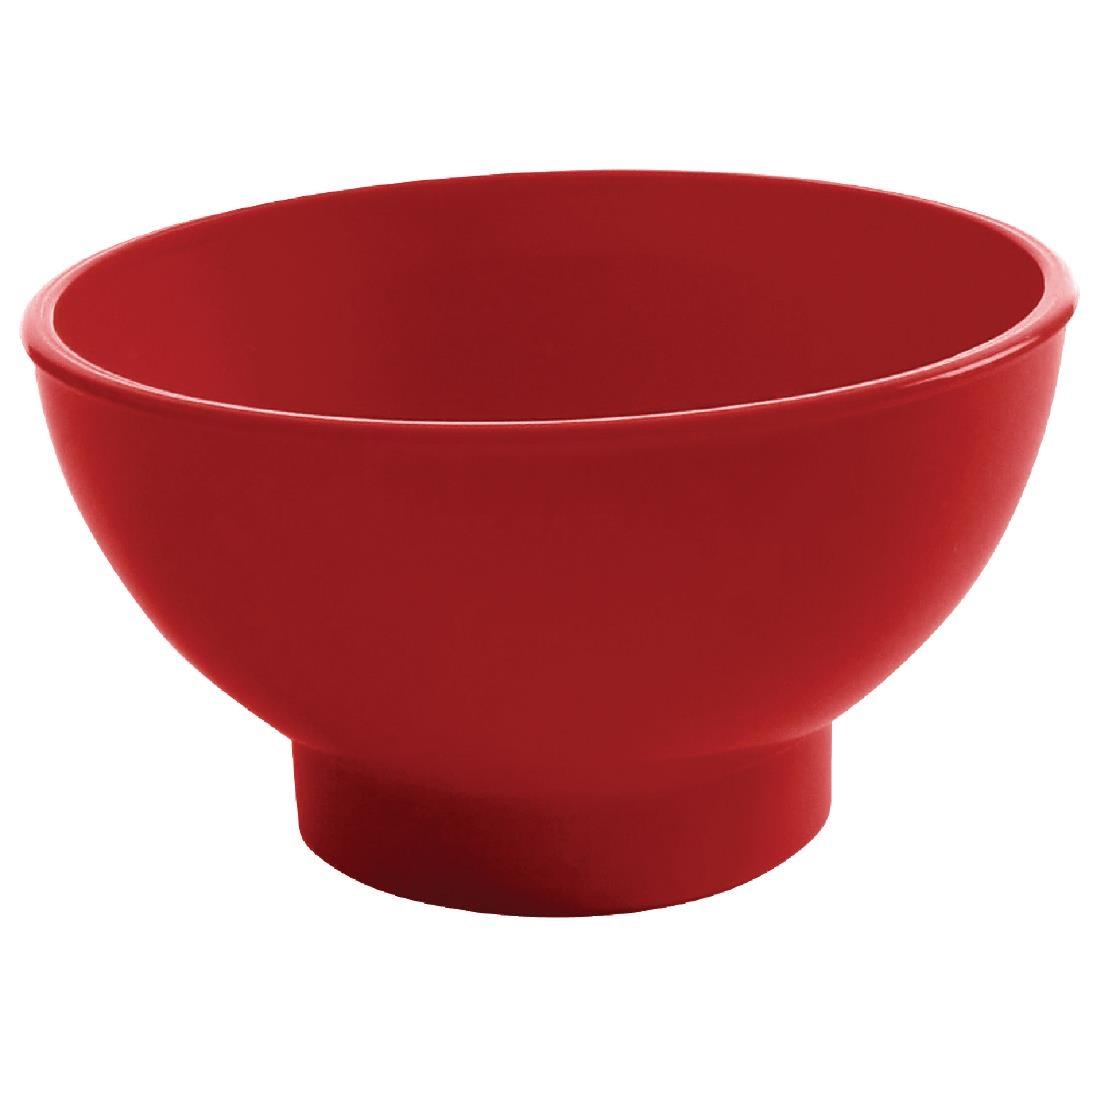 Olympia Kristallon Sundae Dishes Red 95mm (Pack of 12) - DL110  - 1